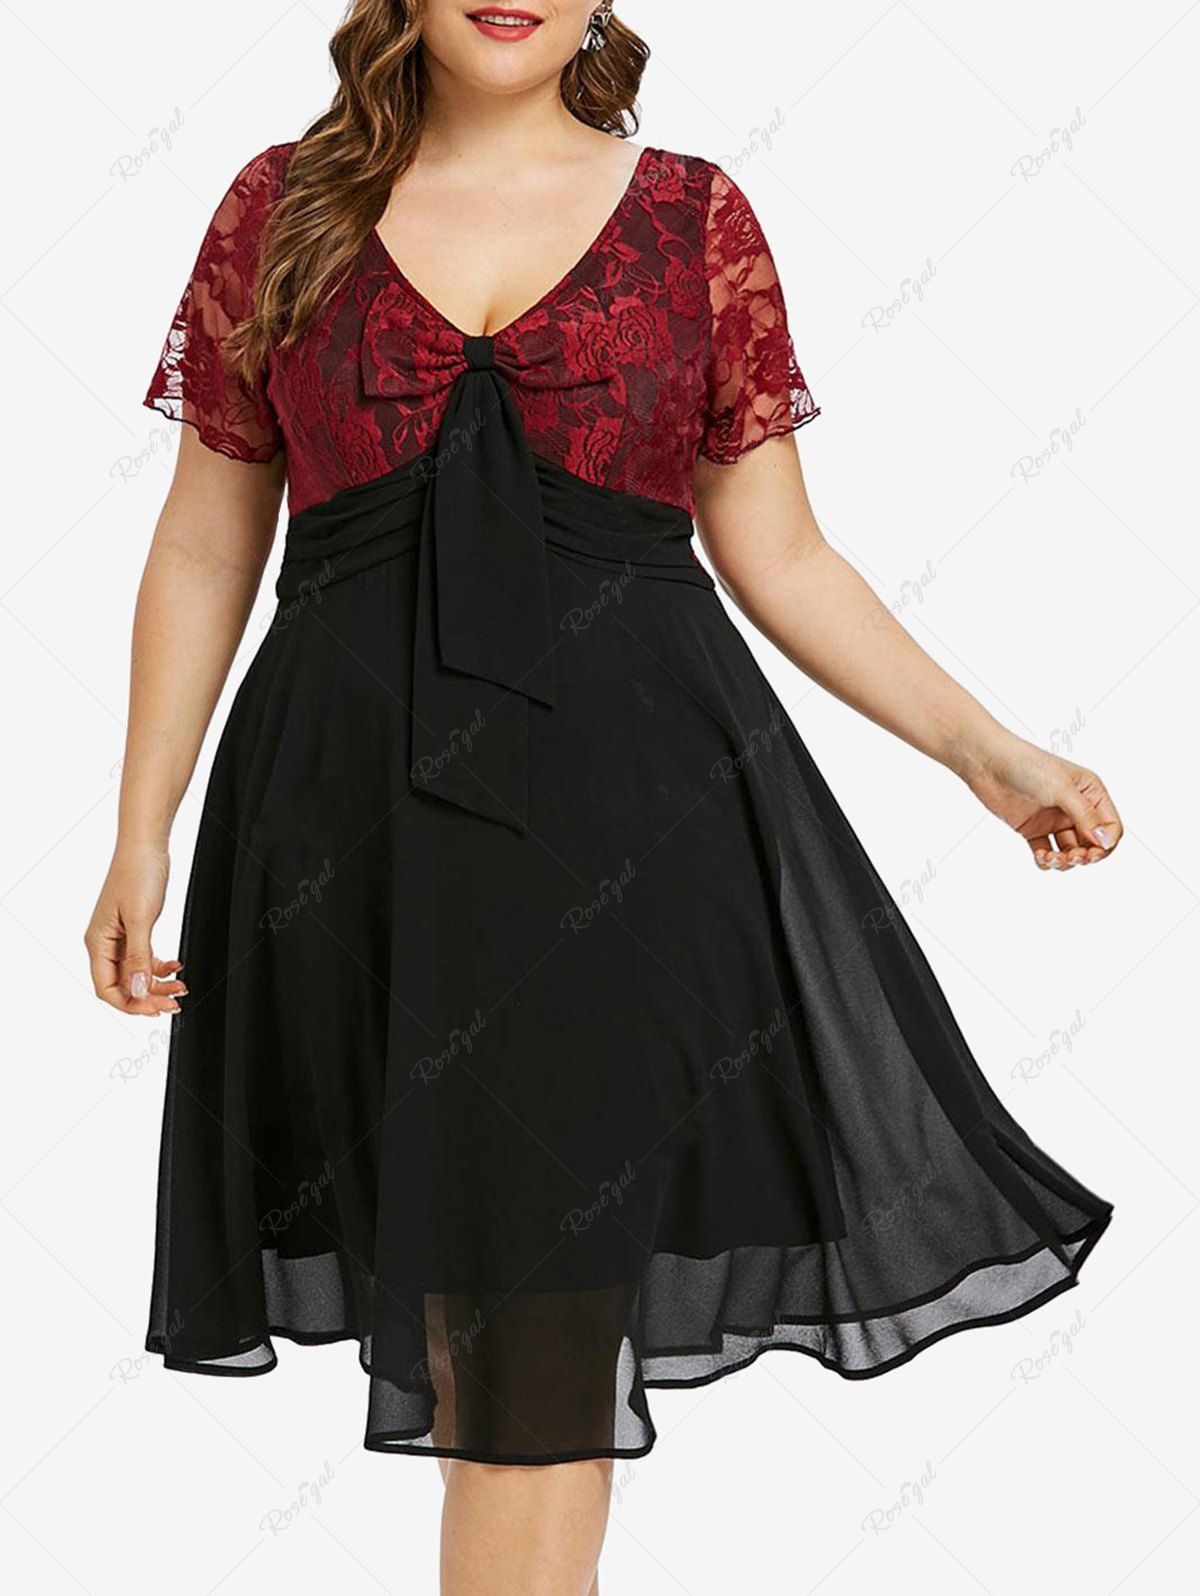 Chic Plus Size Floral Lace Bowknot Embellished Layered Dress  